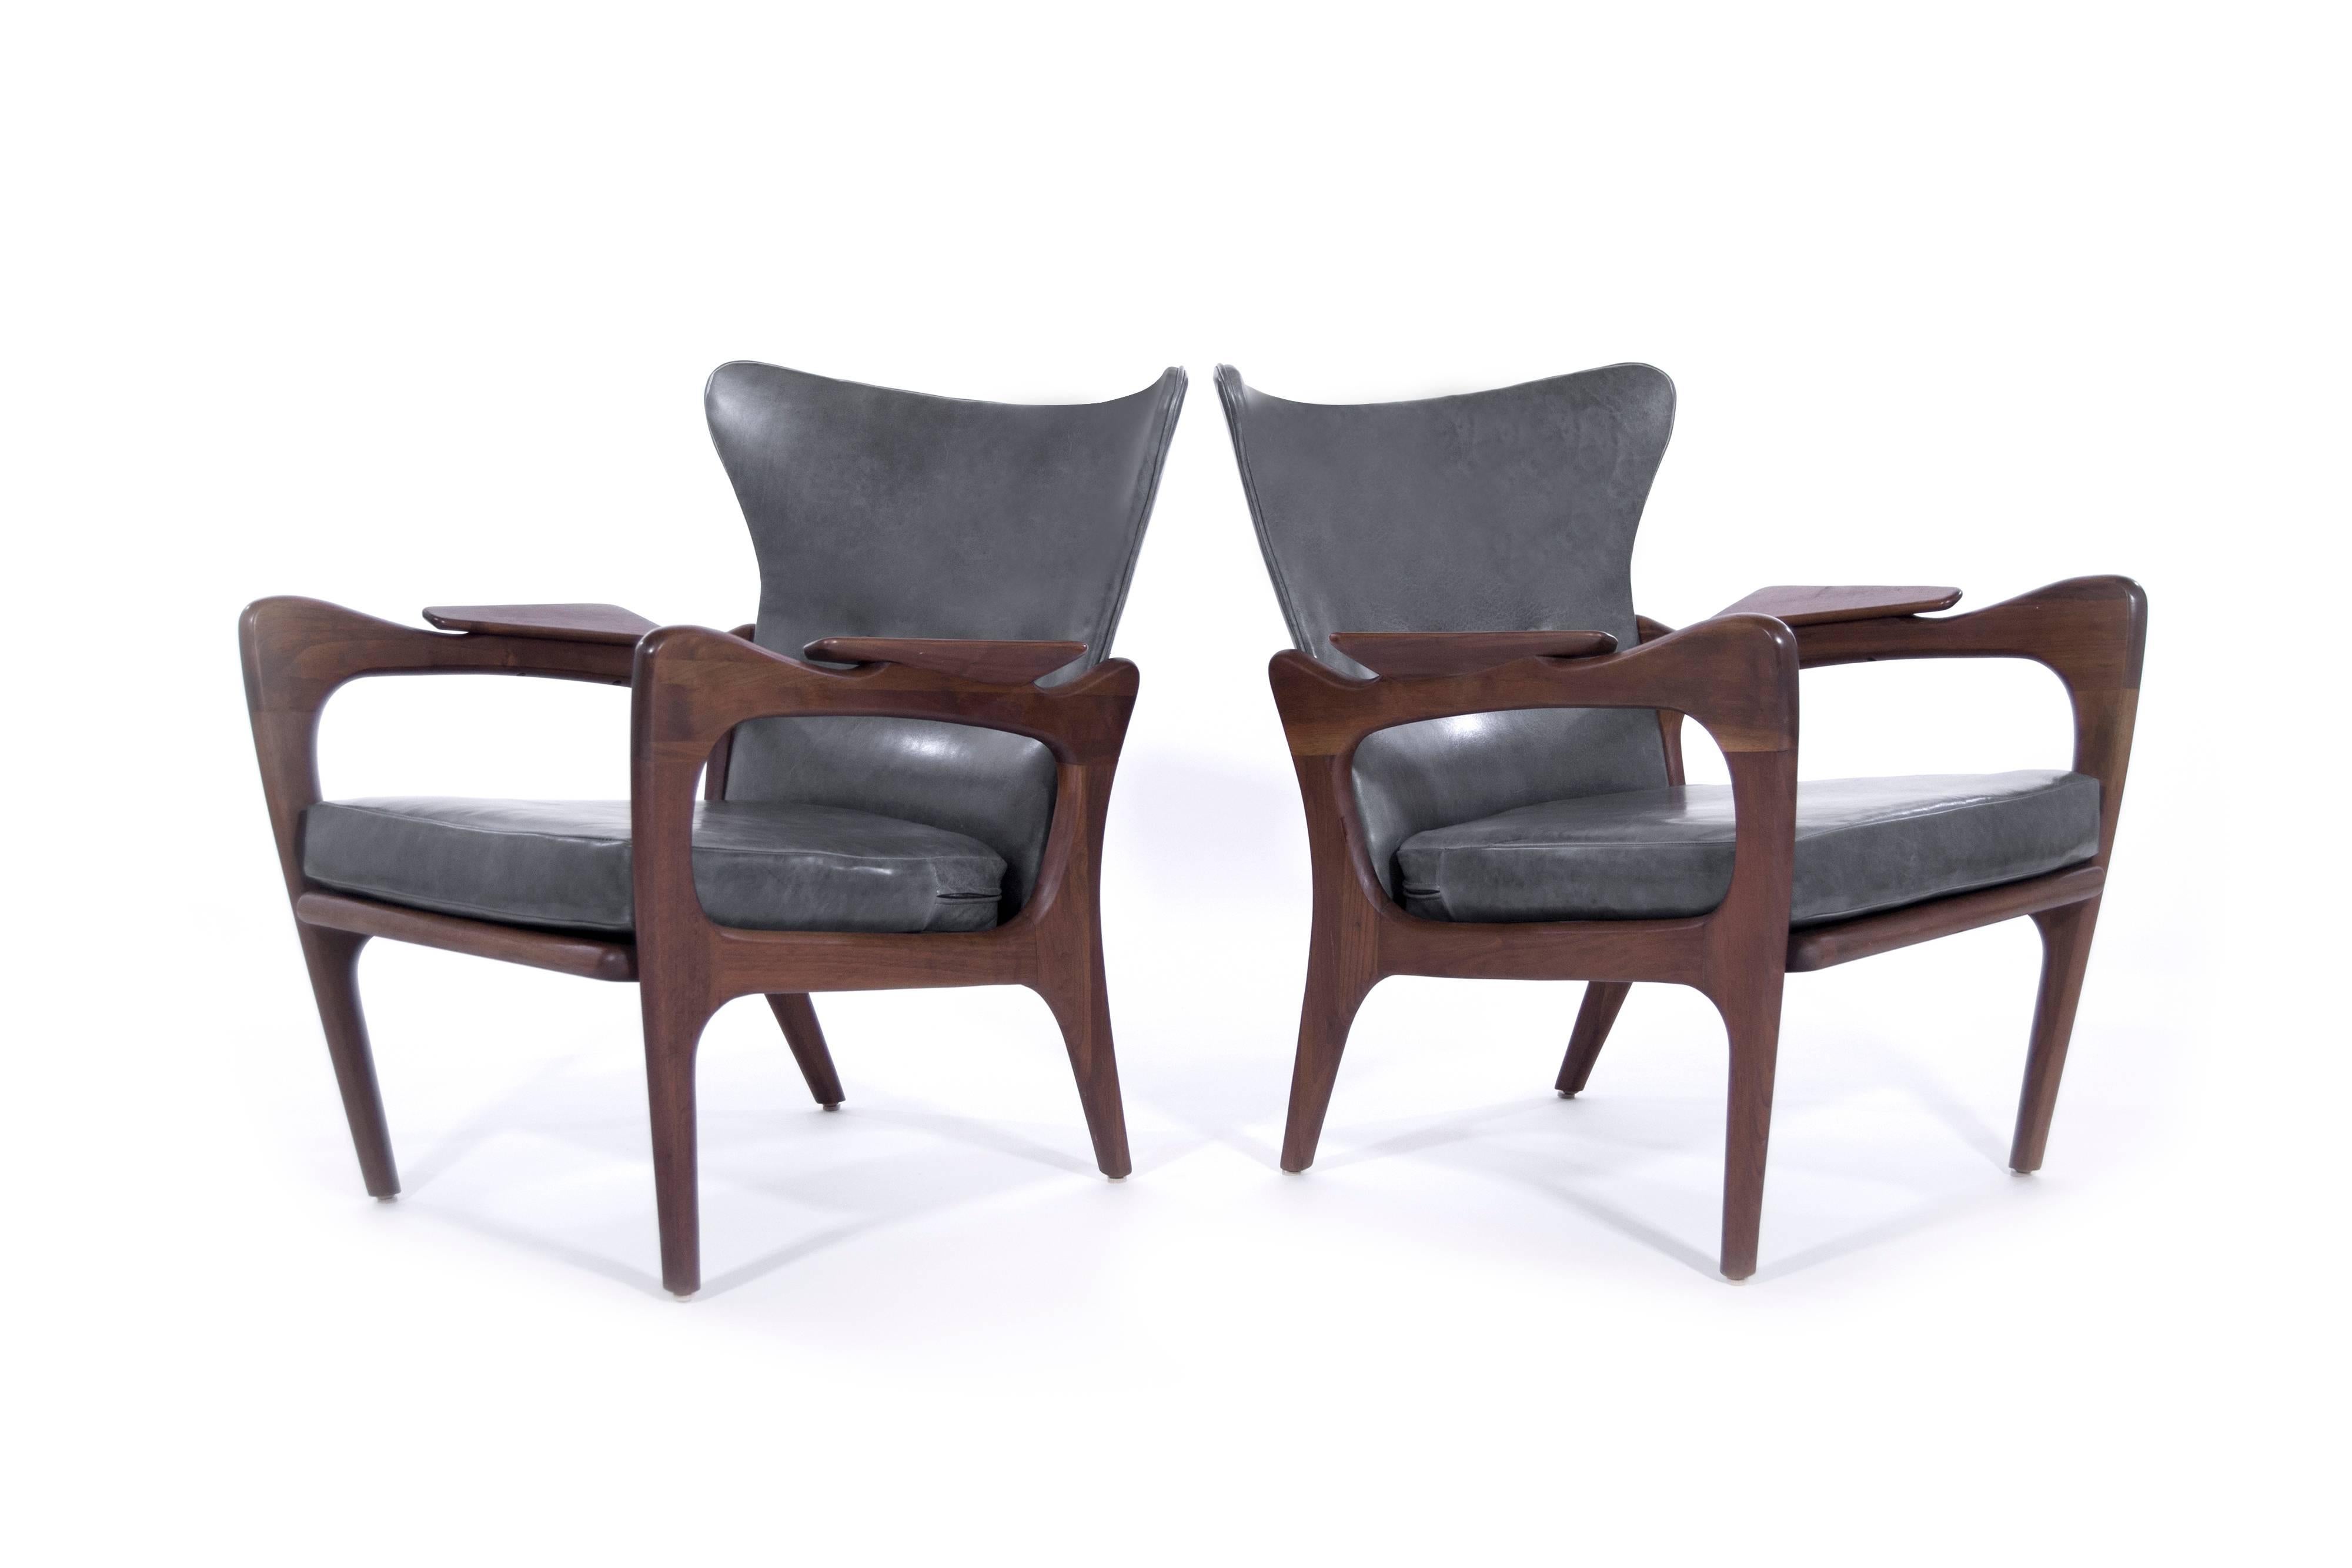 Adrian Pearsall wingback lounge chairs for Craft Associates, model 2291-C, in excellent restored condition. Sculptural walnut frames have been fully restored. They boast hand-cut foam and are newly re-upholstered in Echo Granite leather by Moore &